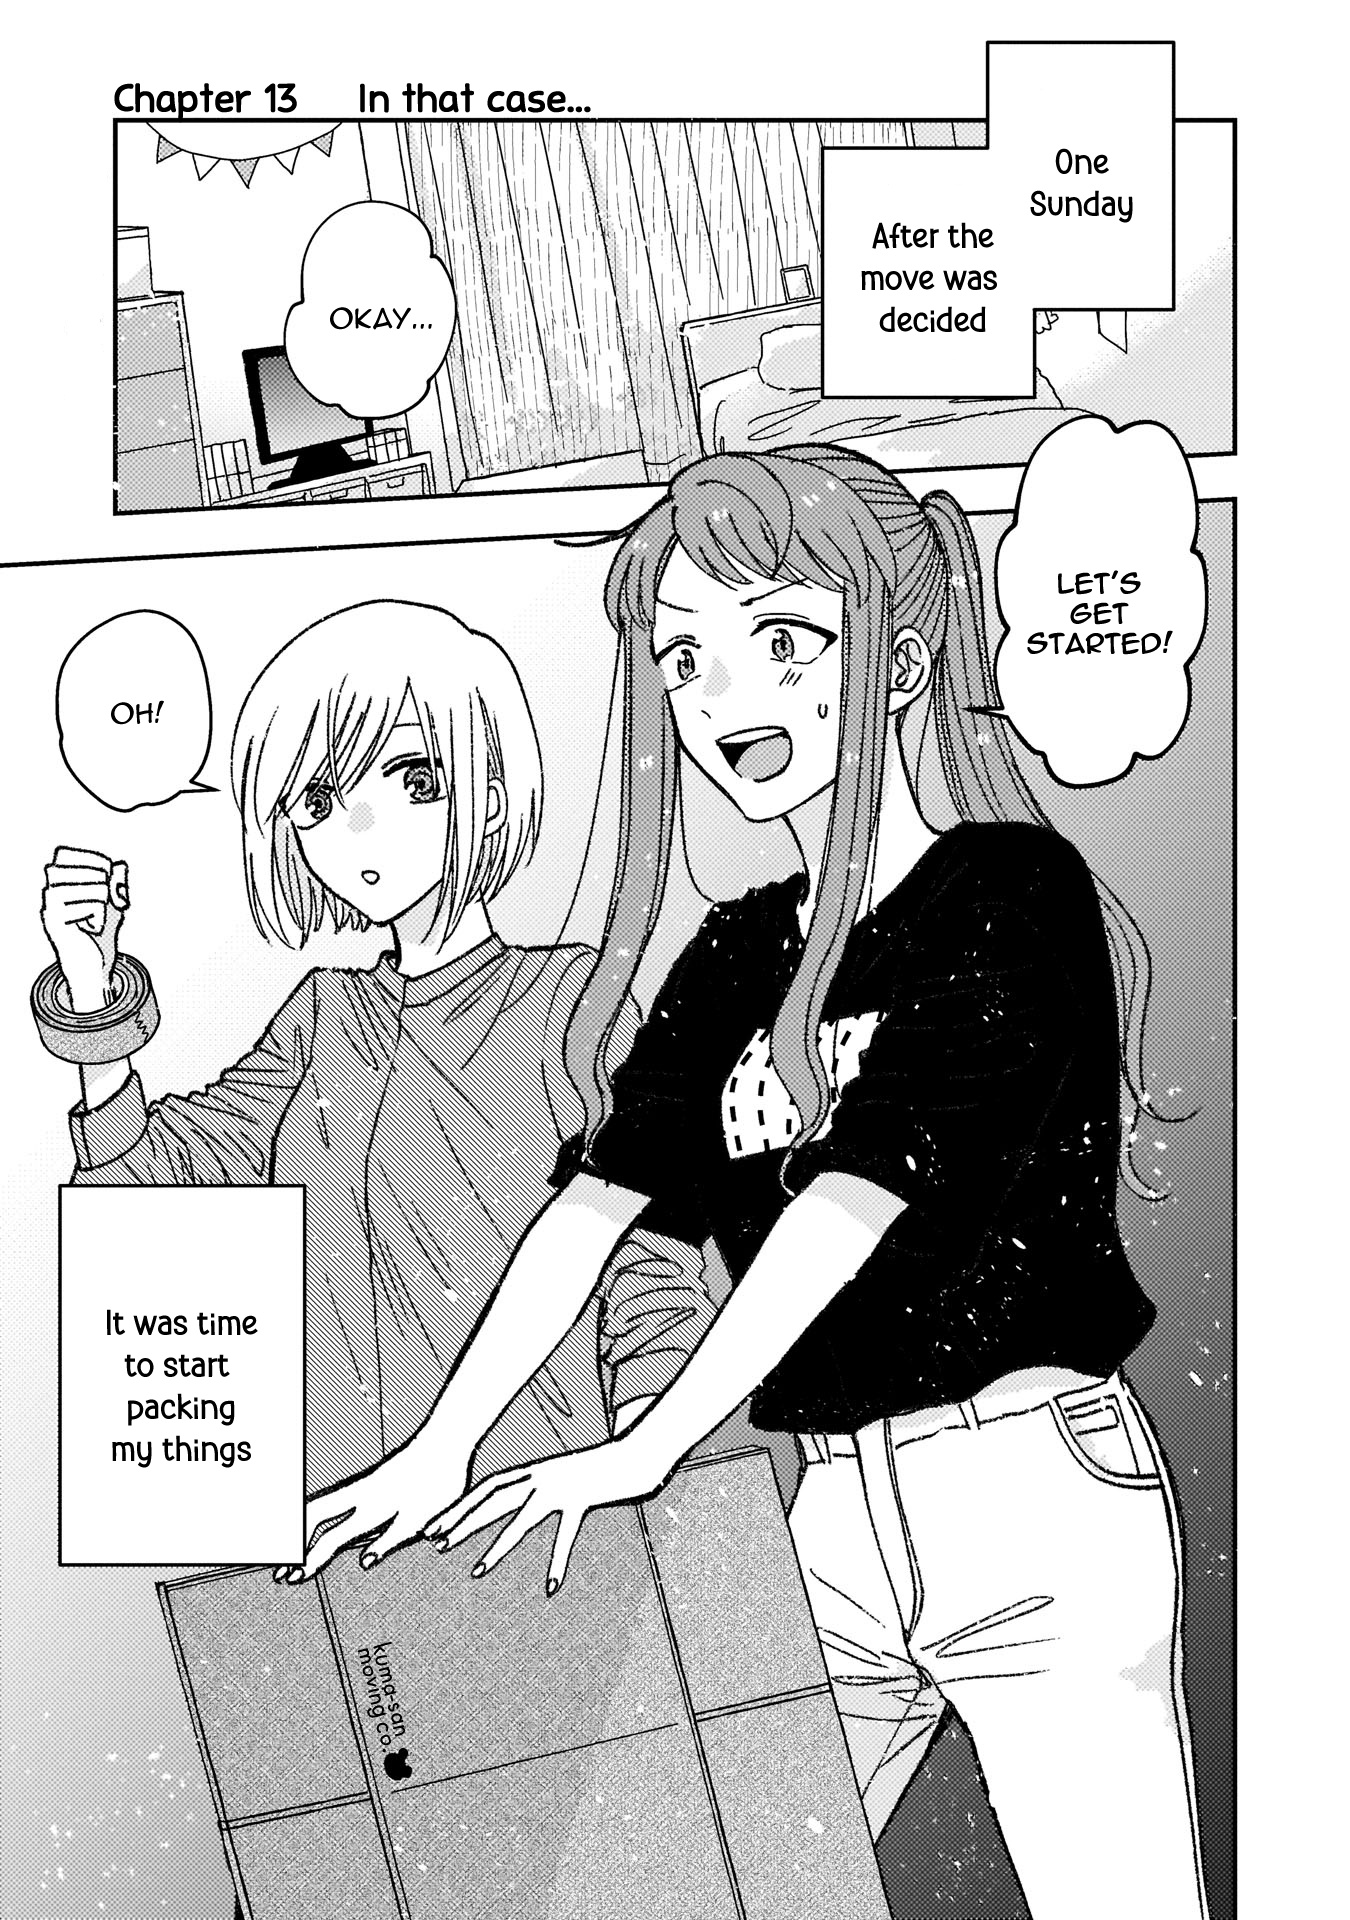 With Her Who Likes My Sister Vol.2 Chapter 13: In That Case - Picture 1